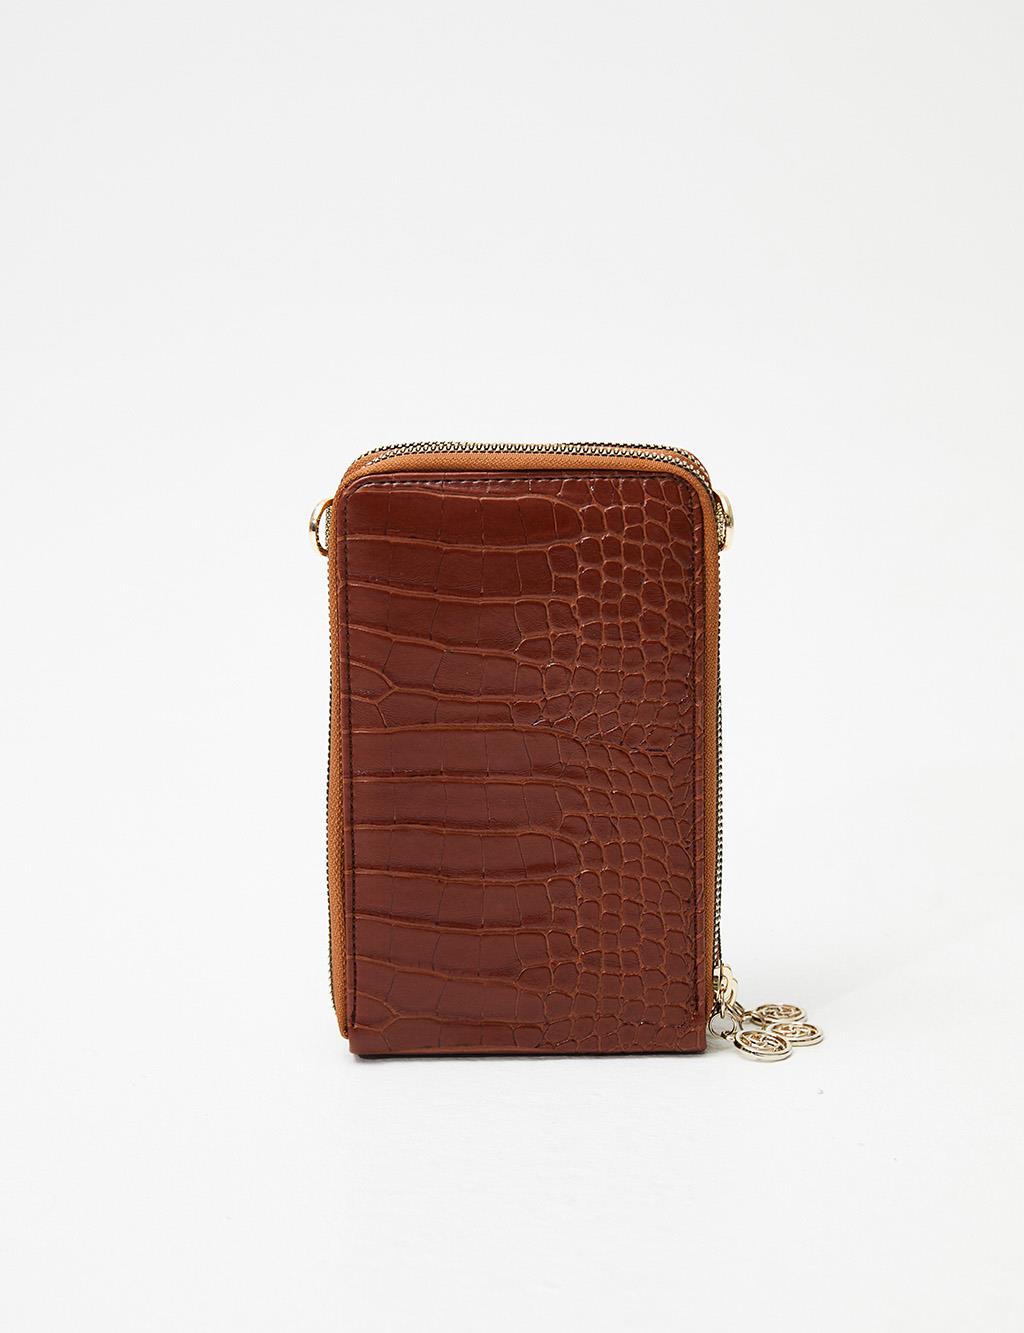 Croco Patterned Three Compartment Bag Wallet Tobacco